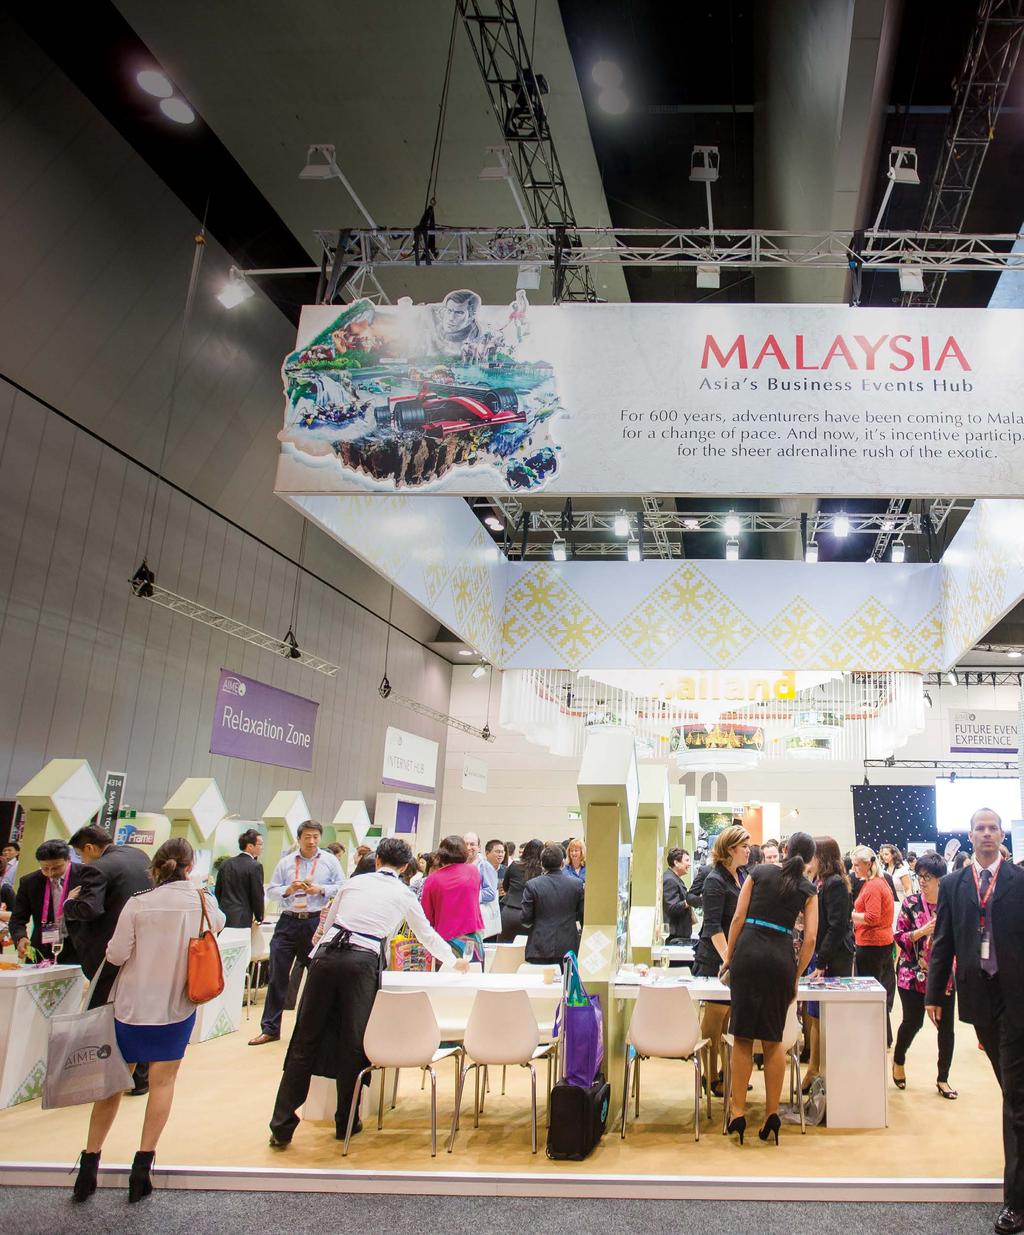 We are here to assist local and international exhibition organisers to bid, secure and stage successful exhibitions in Malaysia.